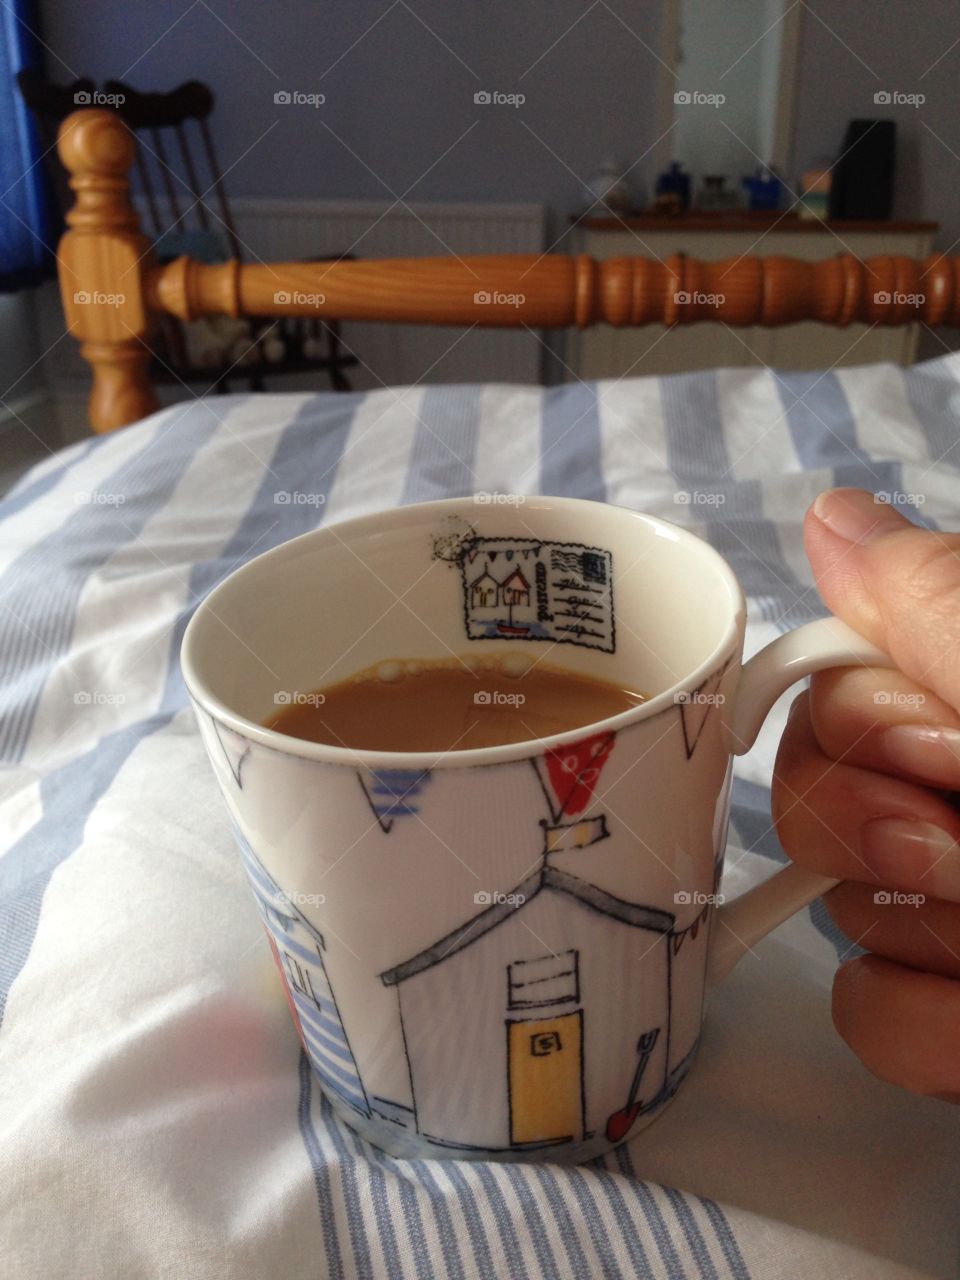 Ahhh you can't beat a nice cuppa in bed! 💙